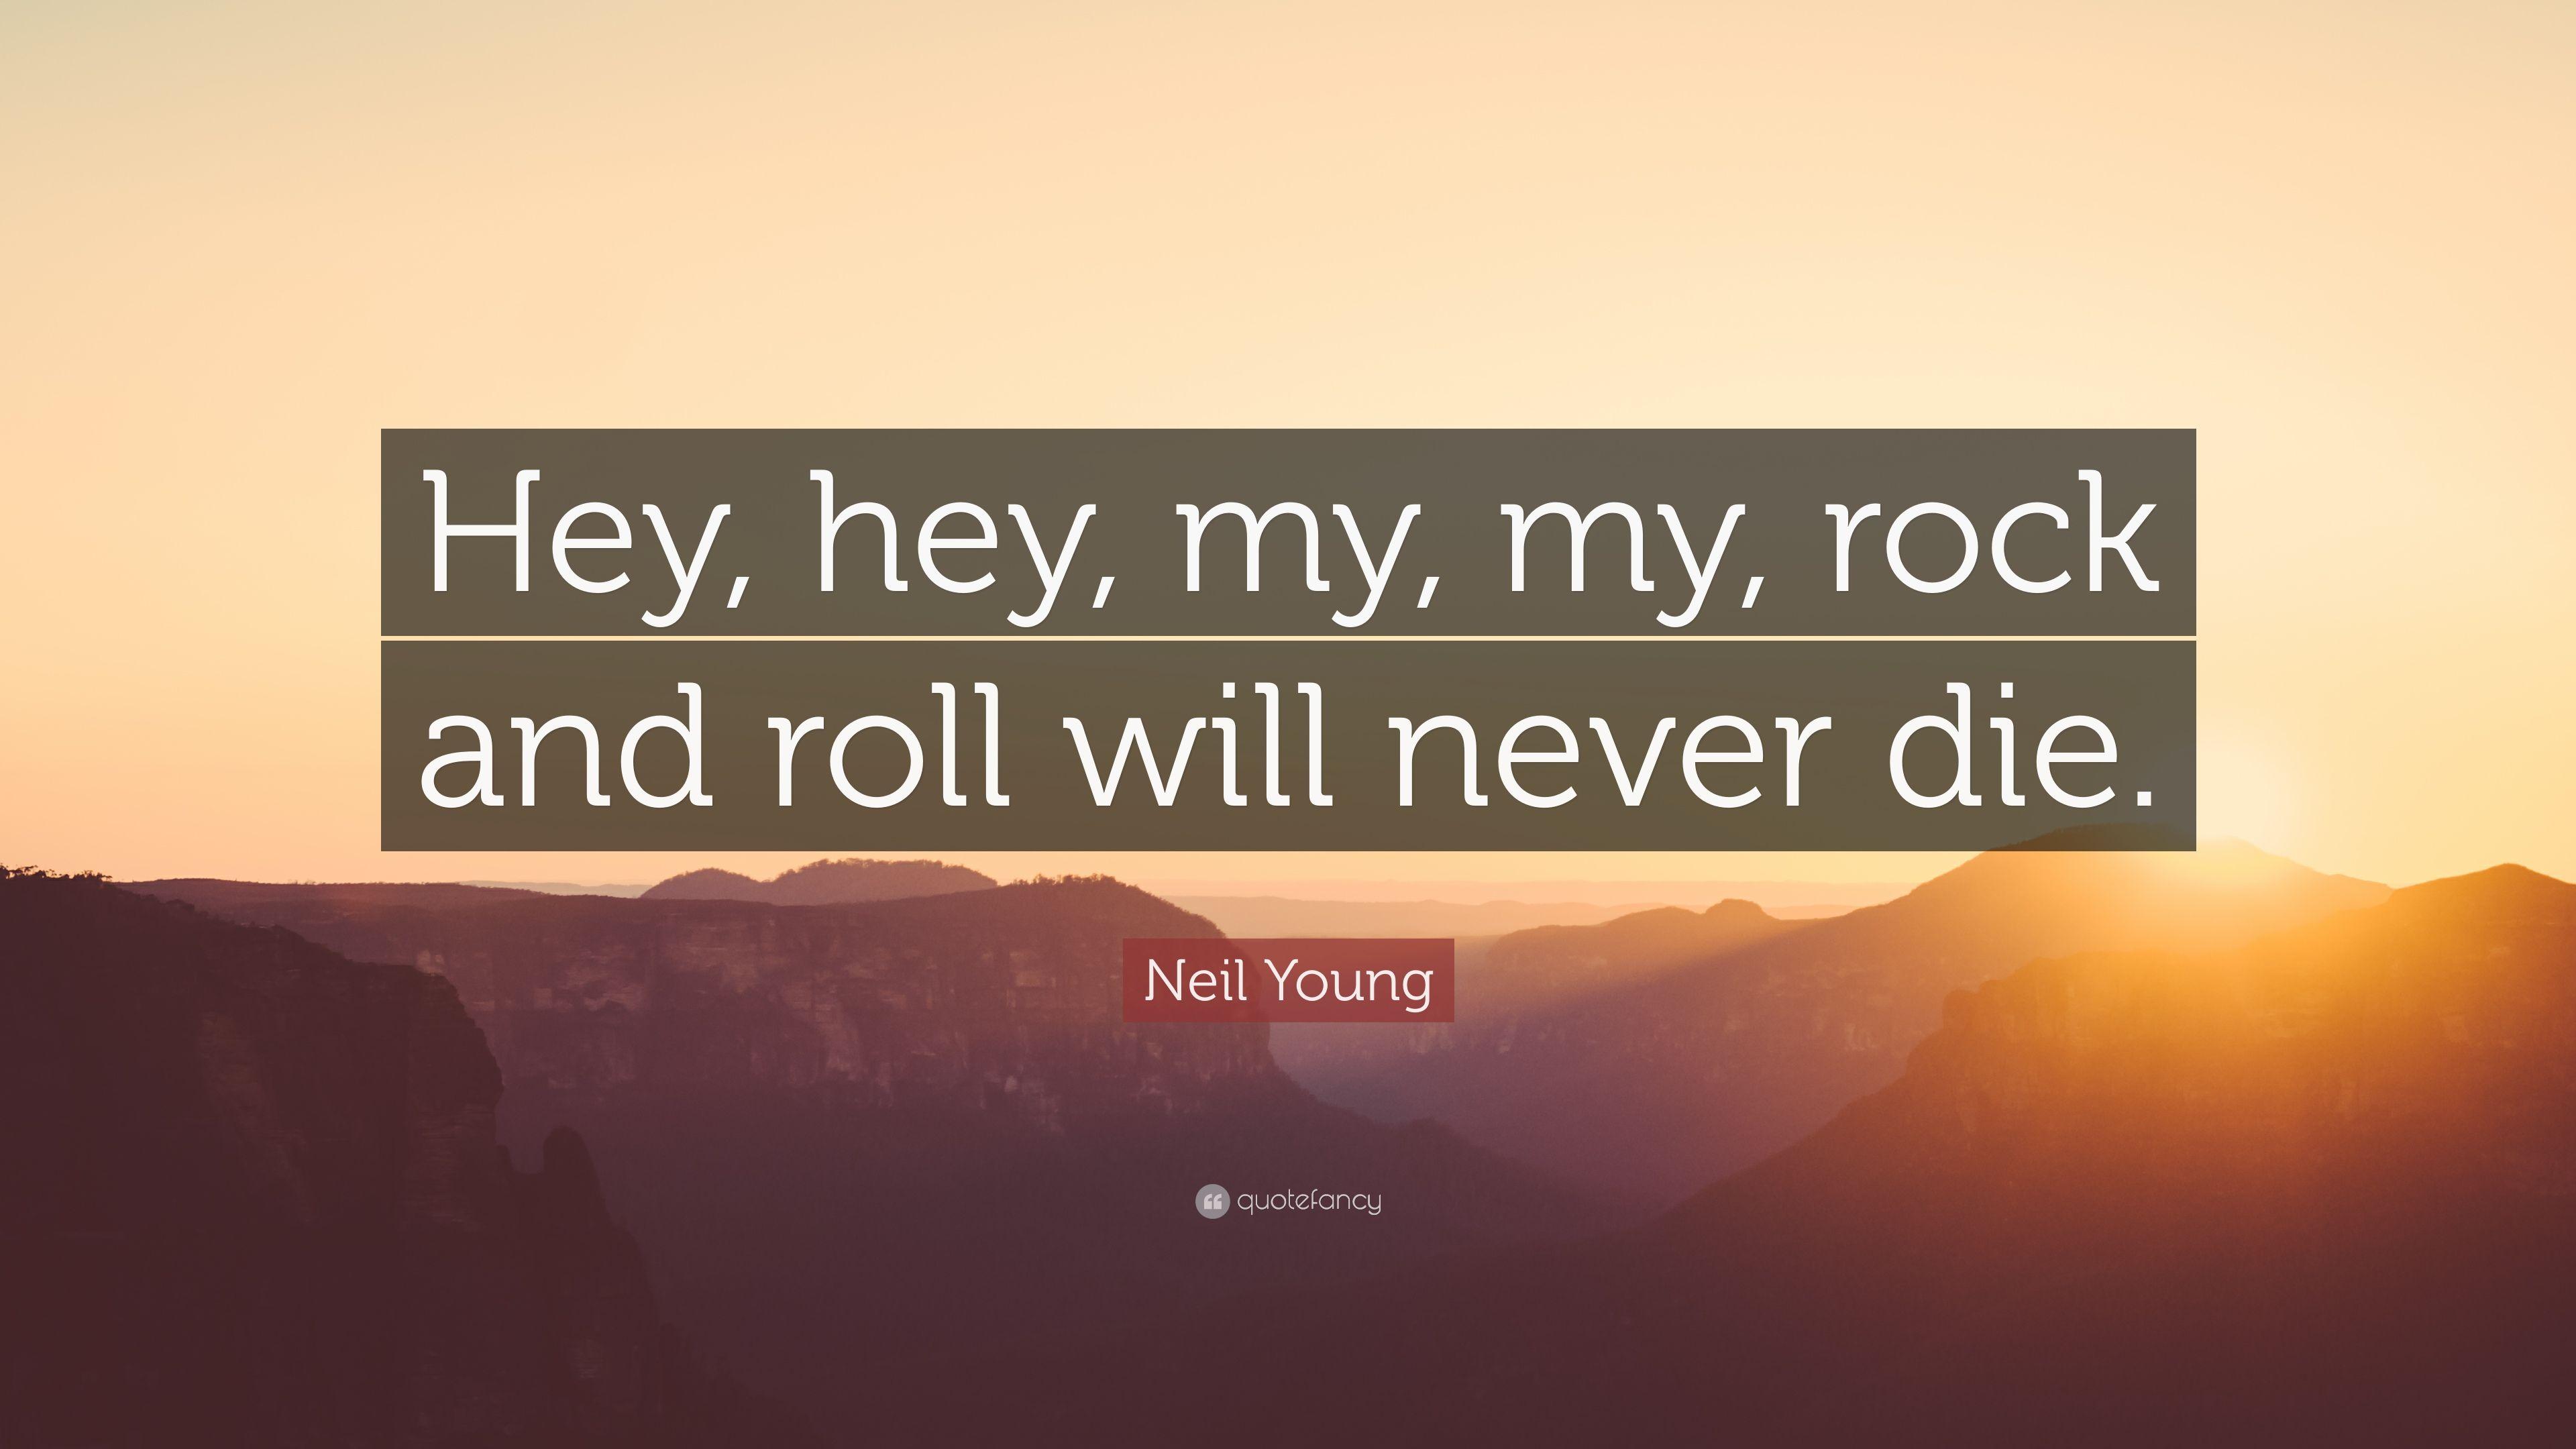 Neil Young Quote: “Hey, hey, my, my, rock and roll will never die